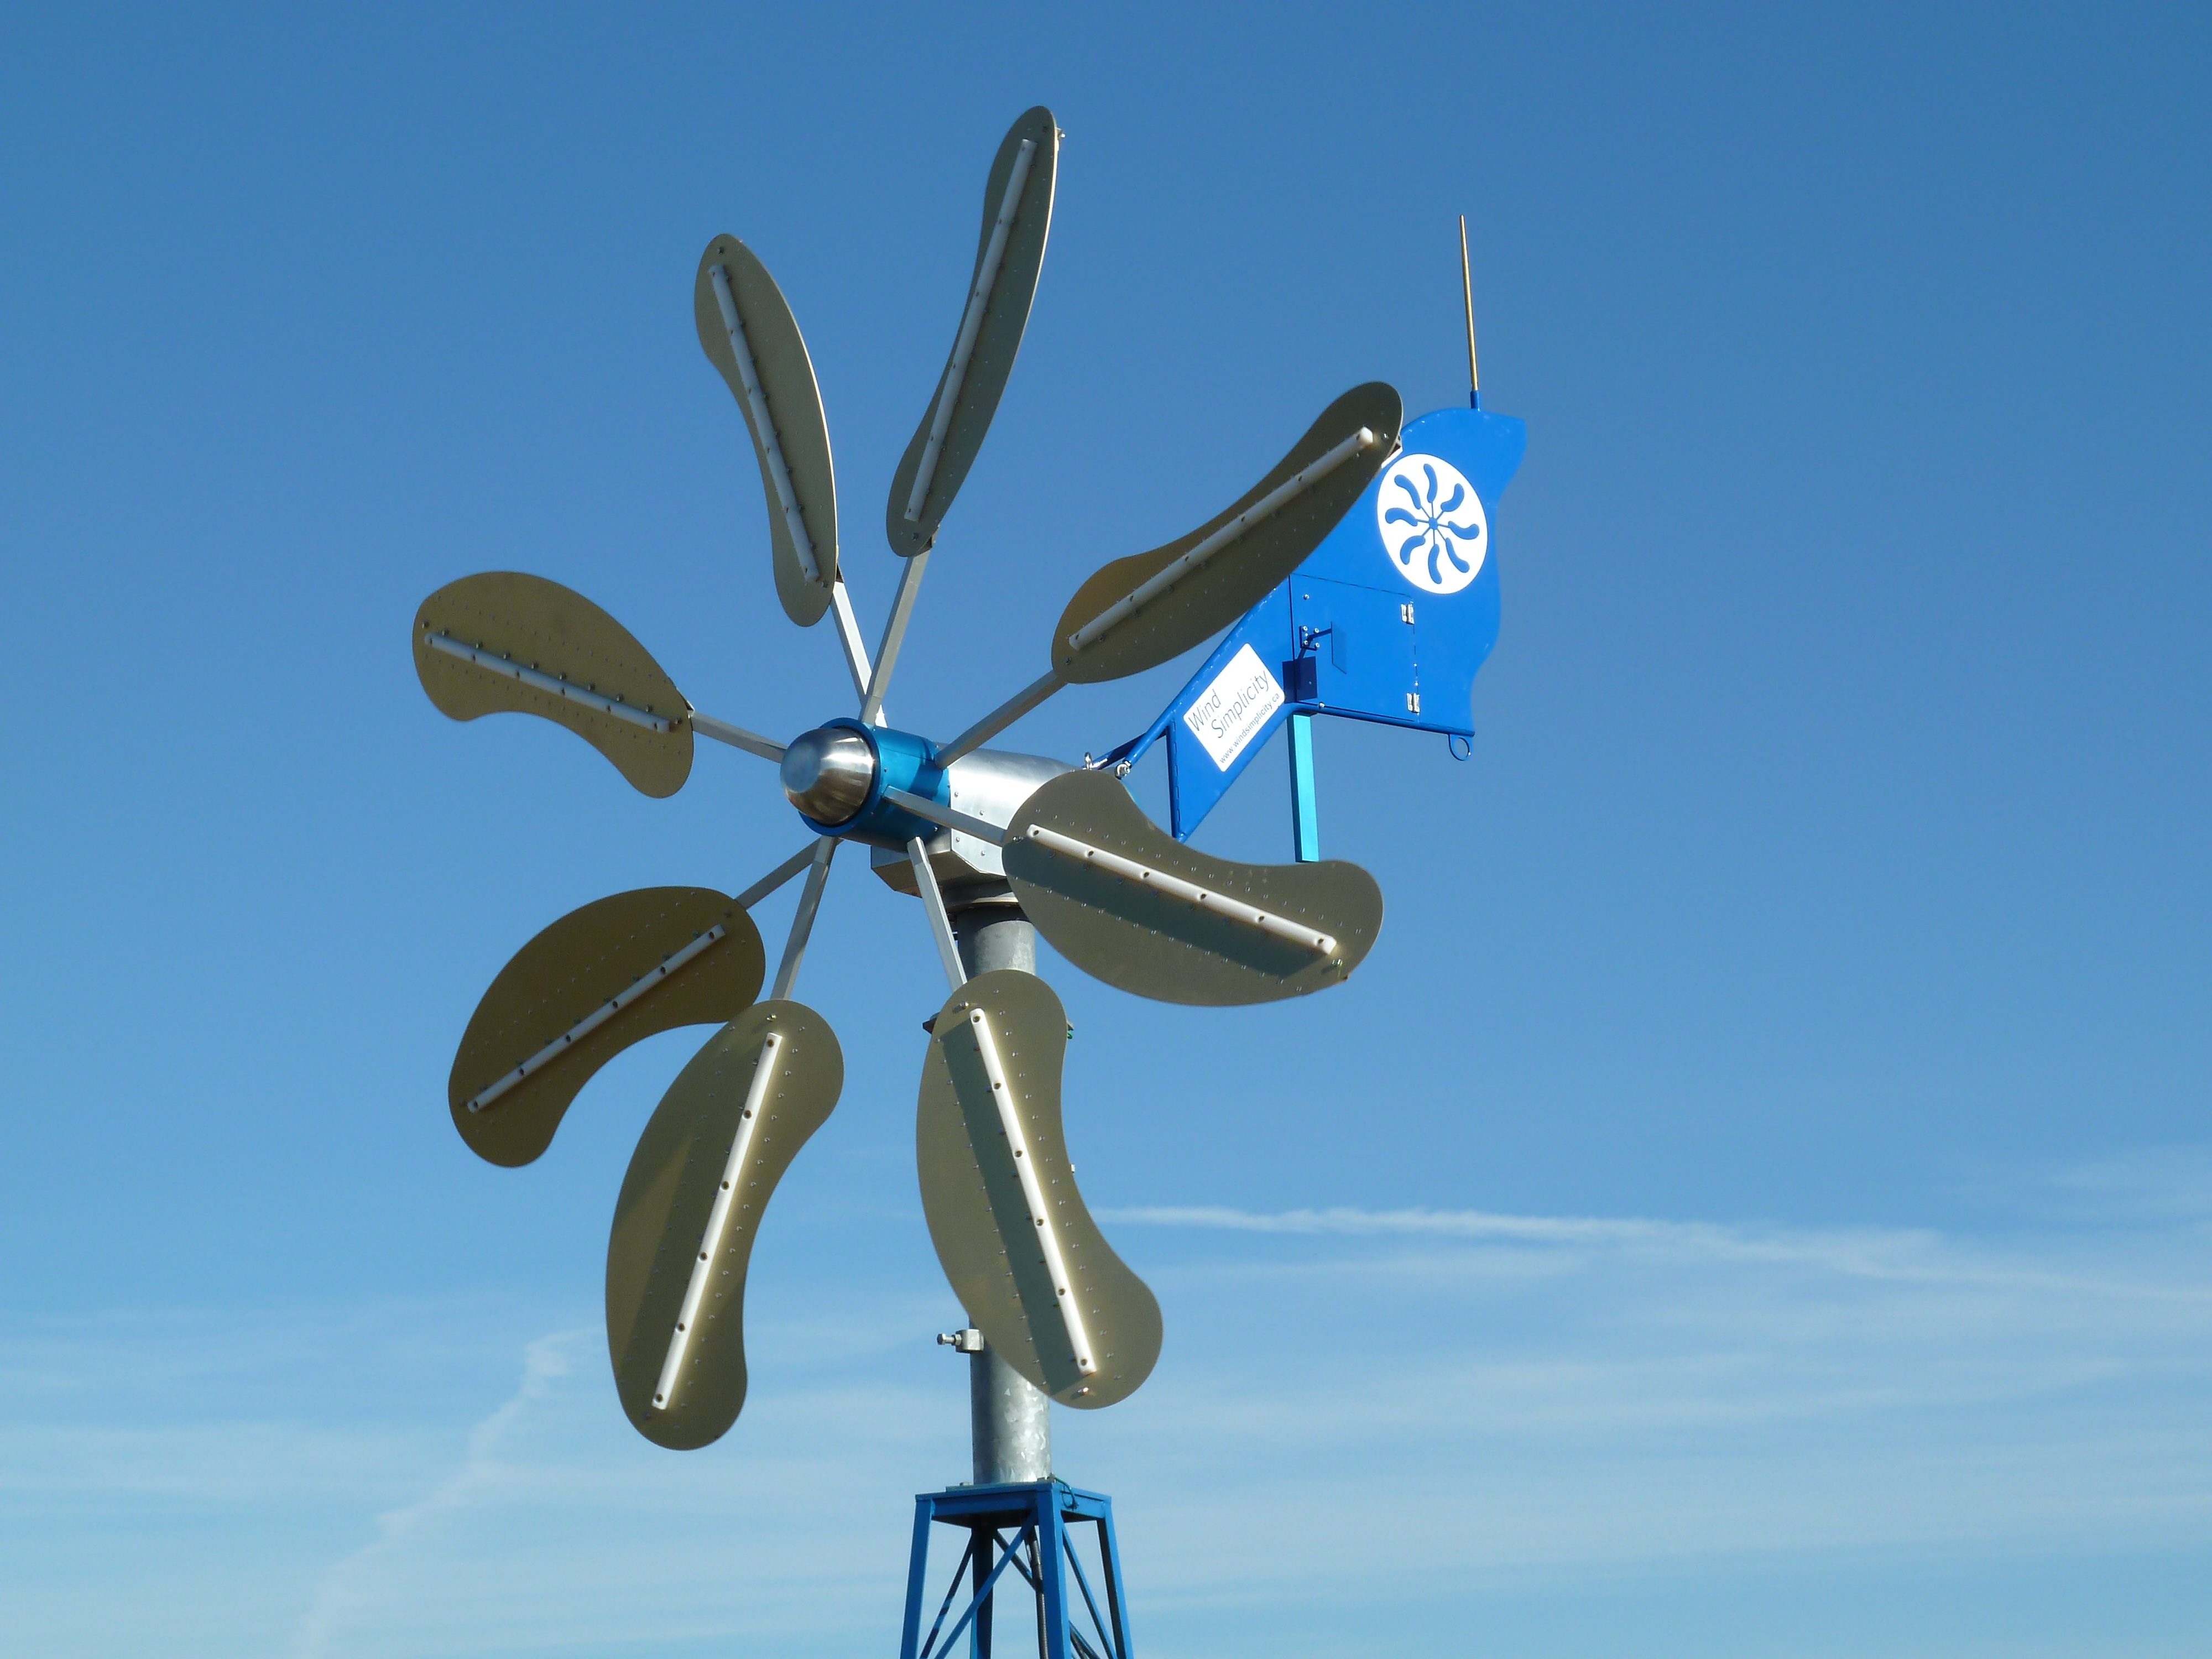 How much power can a wind turbine generate?